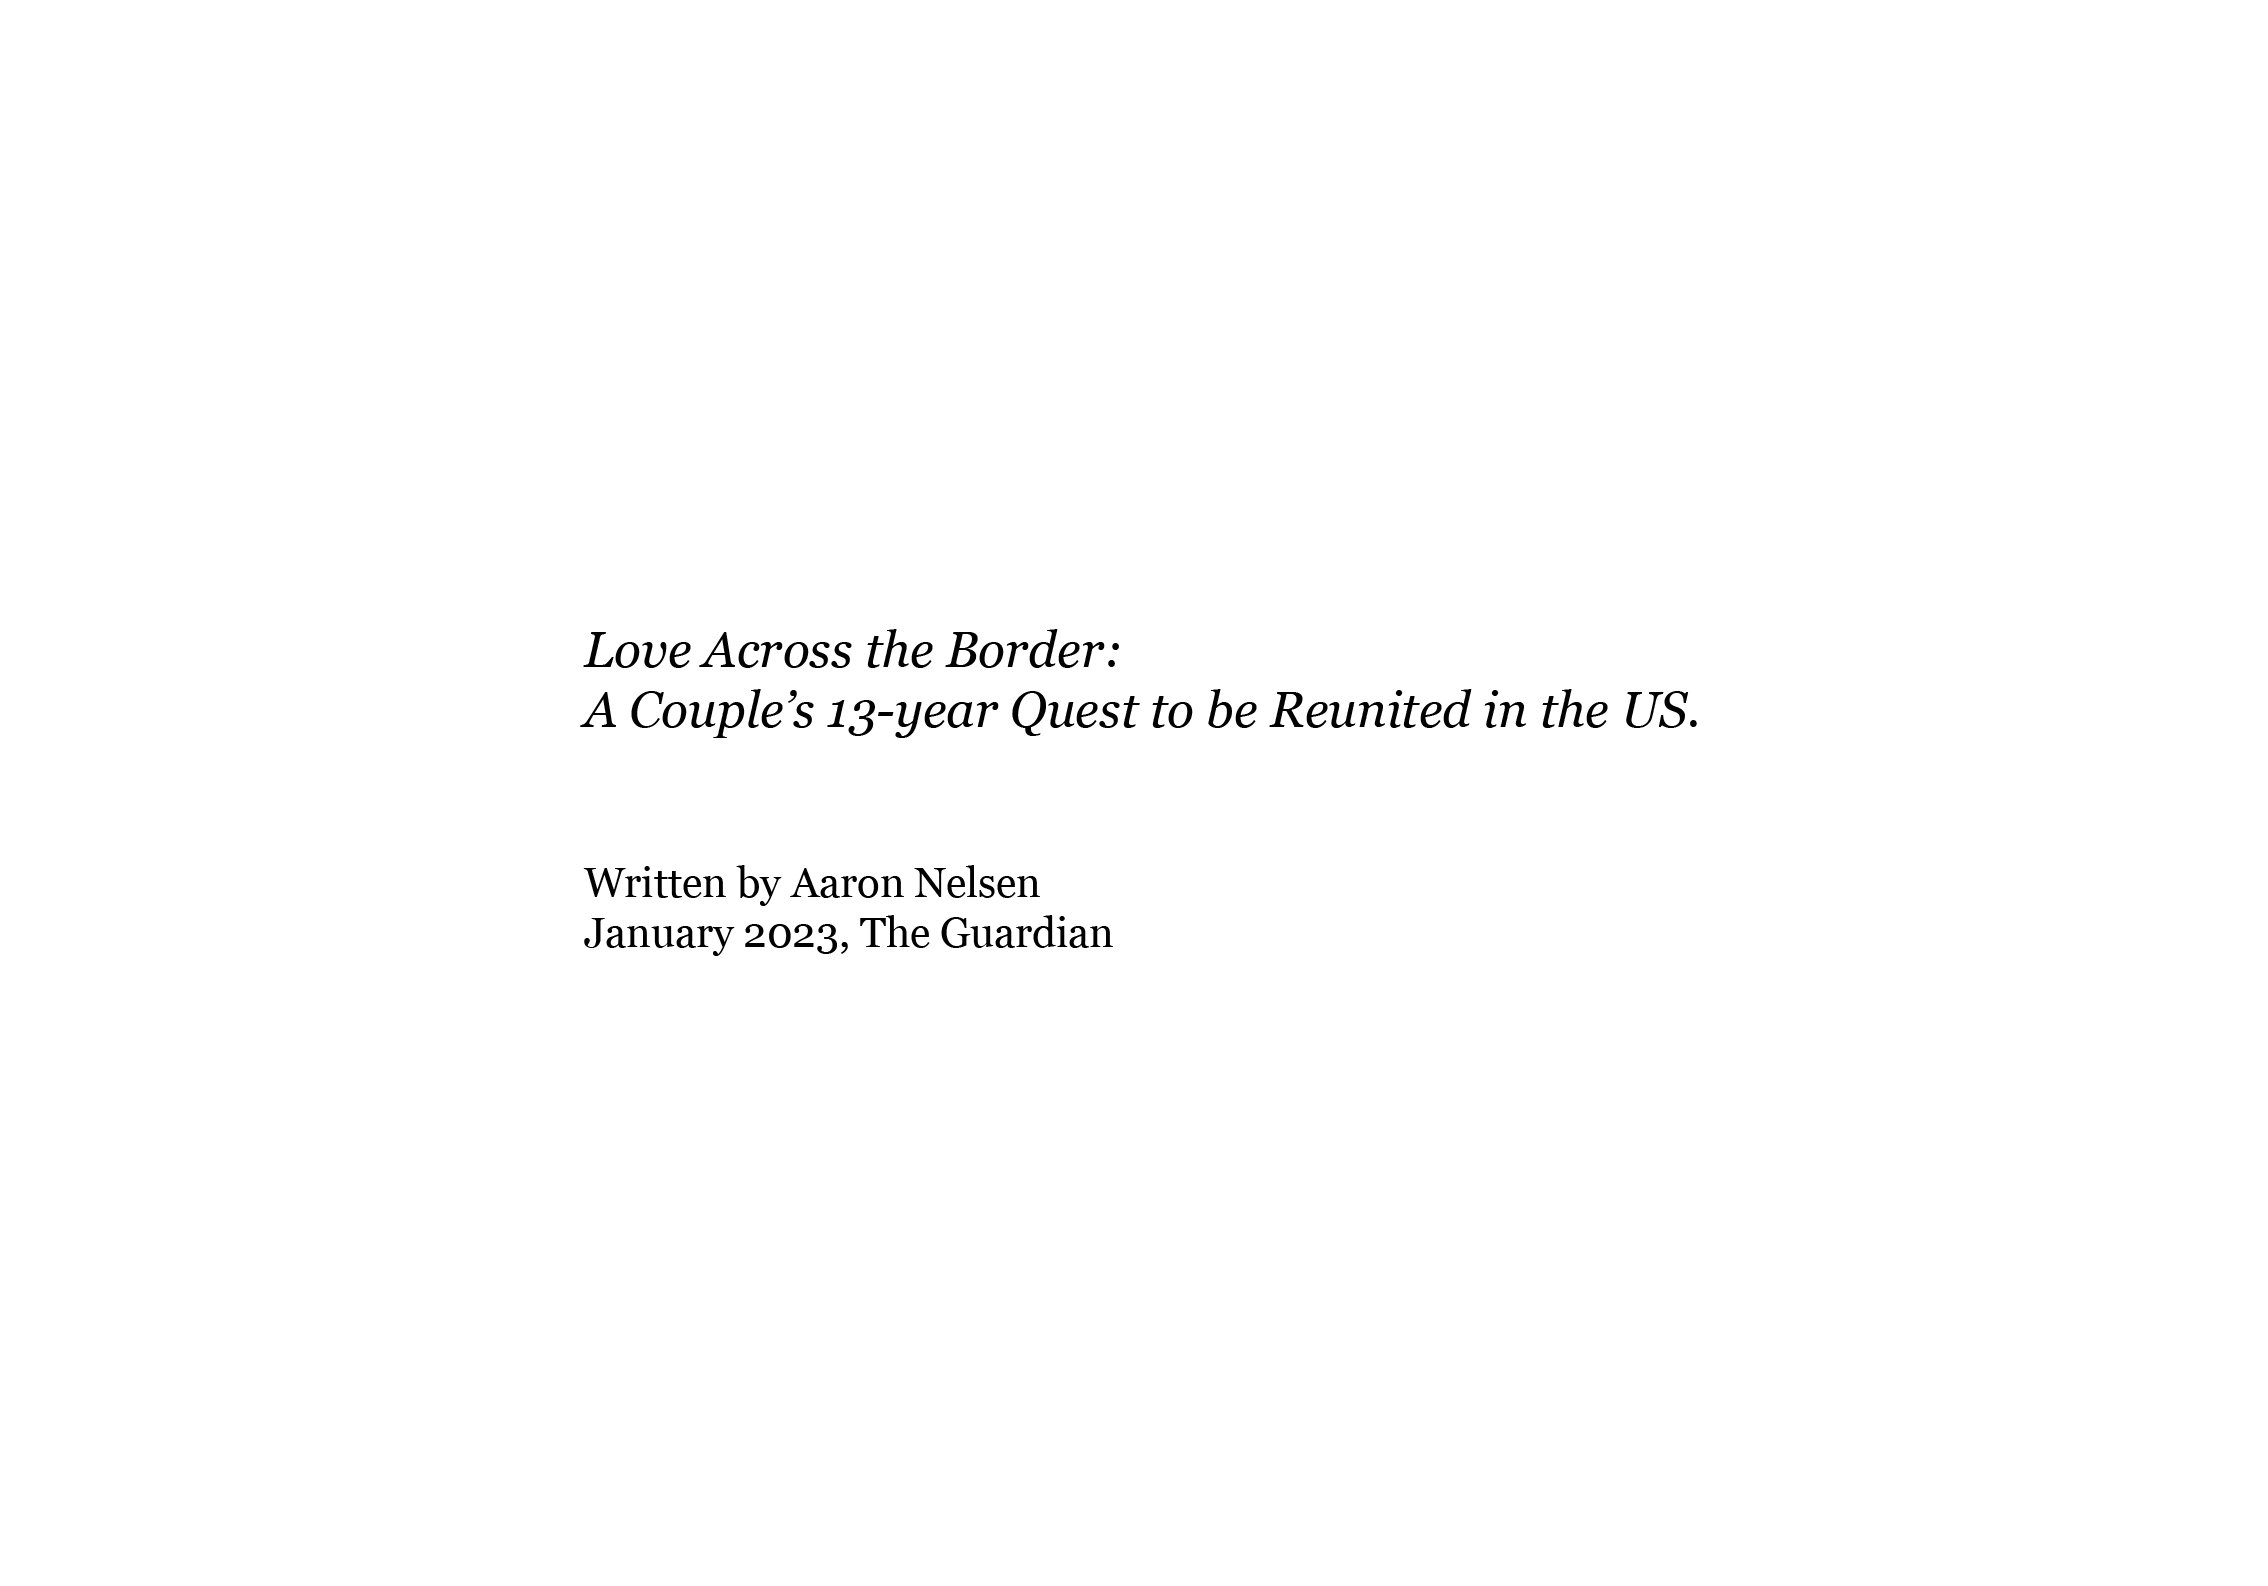  Love Across The Border  The Guardian, 2023  